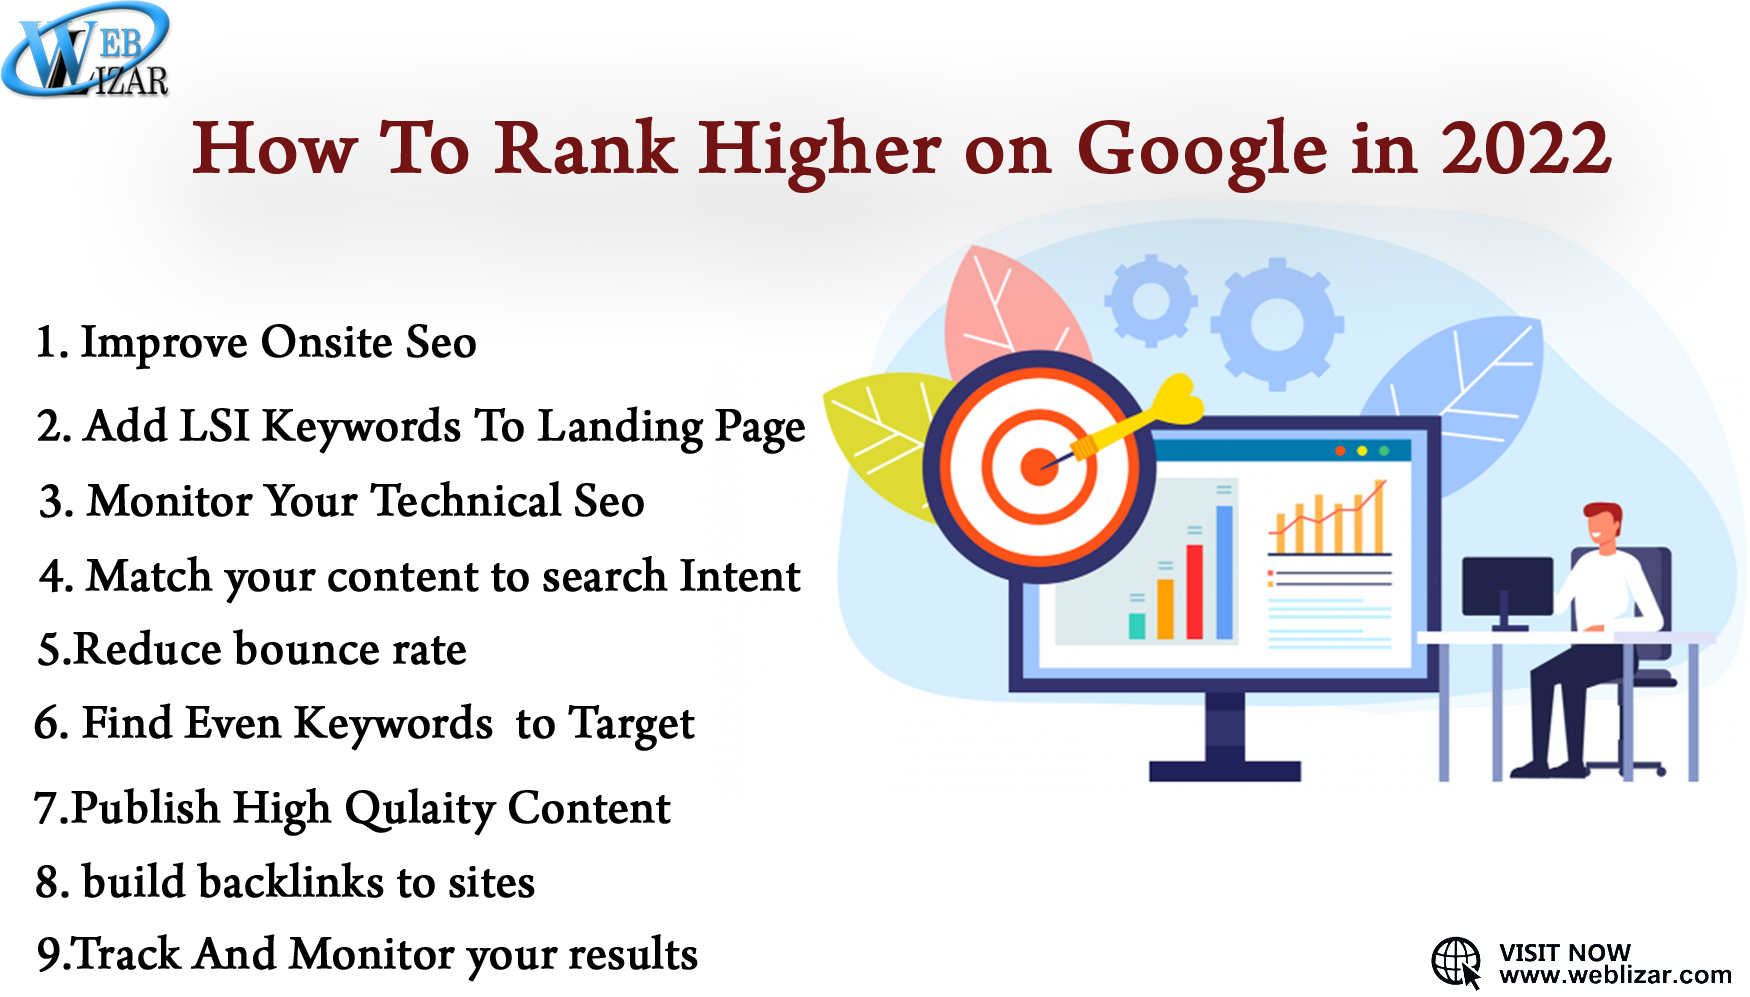 The Secret To Ranking Higher On Google In 2022